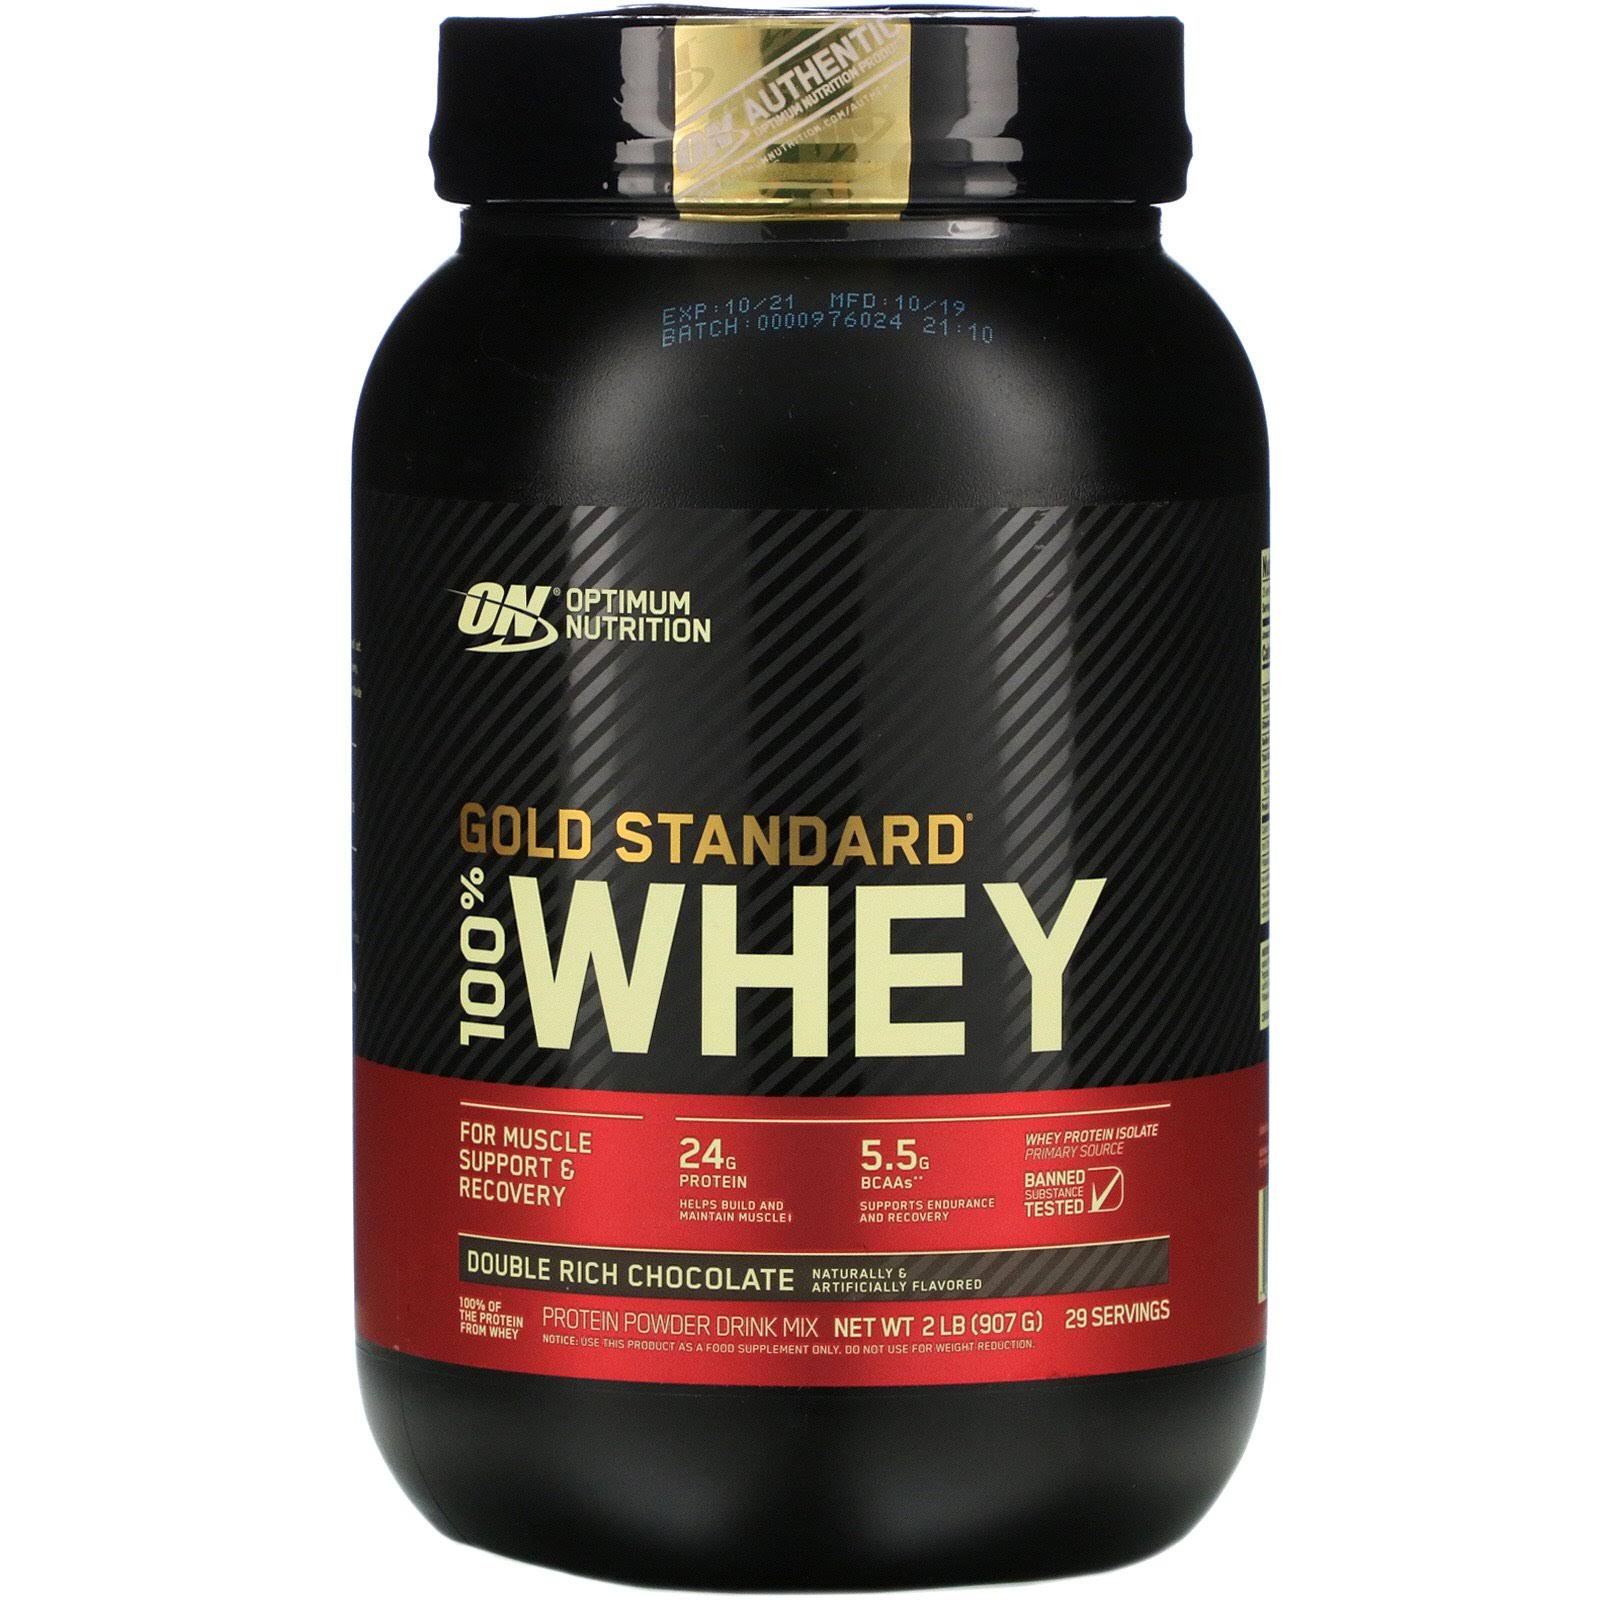 Optimum Nutrition Gold Standard Whey Supplement - Double Rich Chocolate, 908g